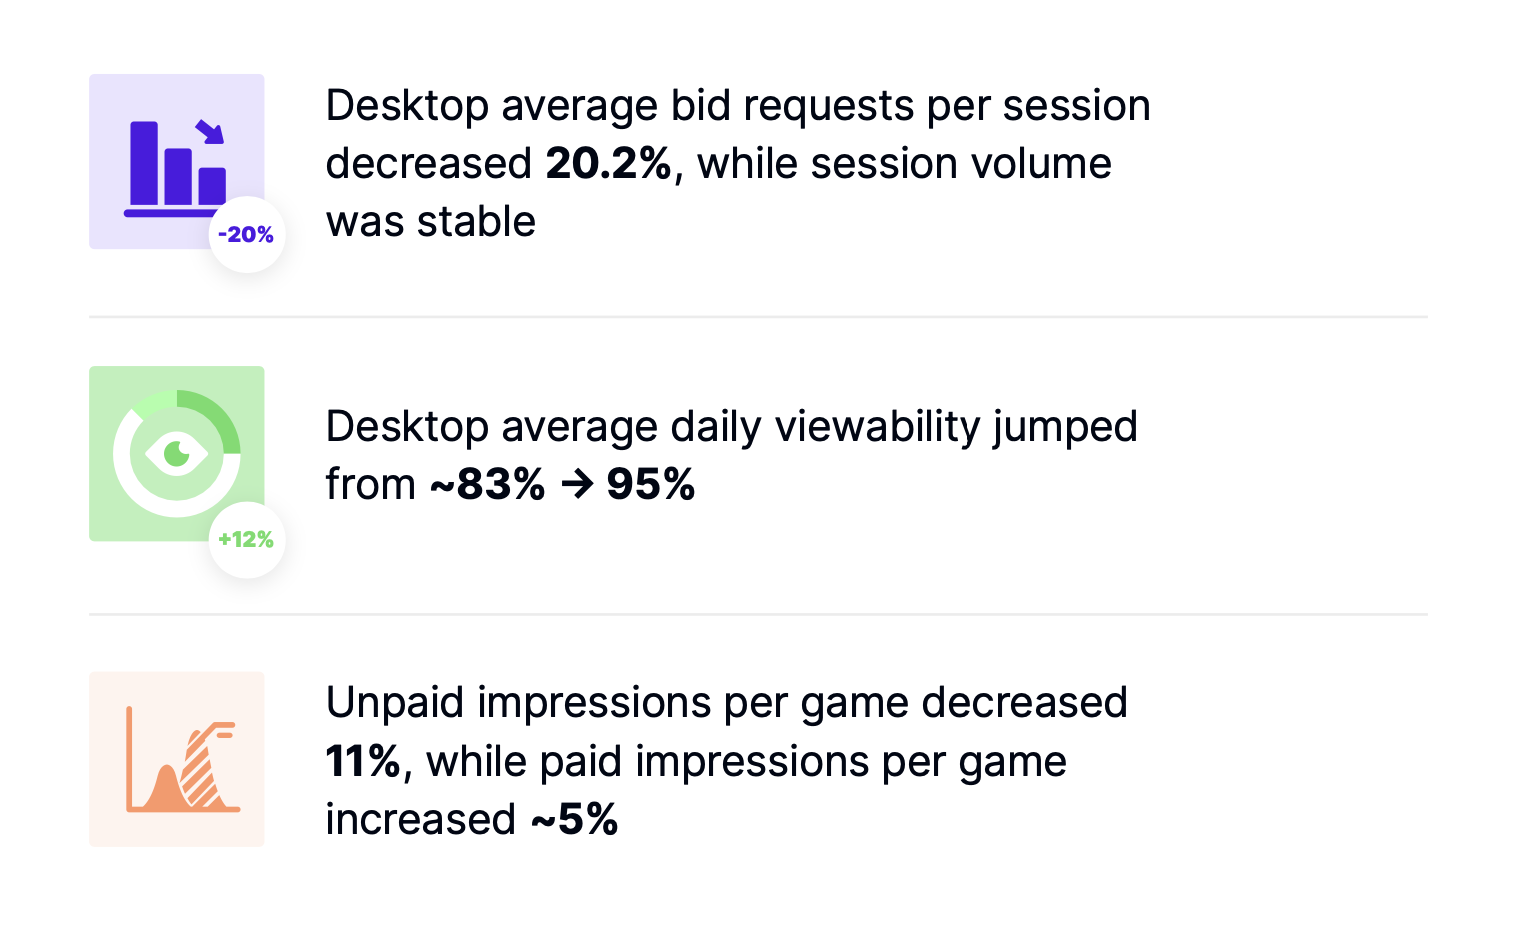 Unpaid impressions decreased and daily ad viewability improved